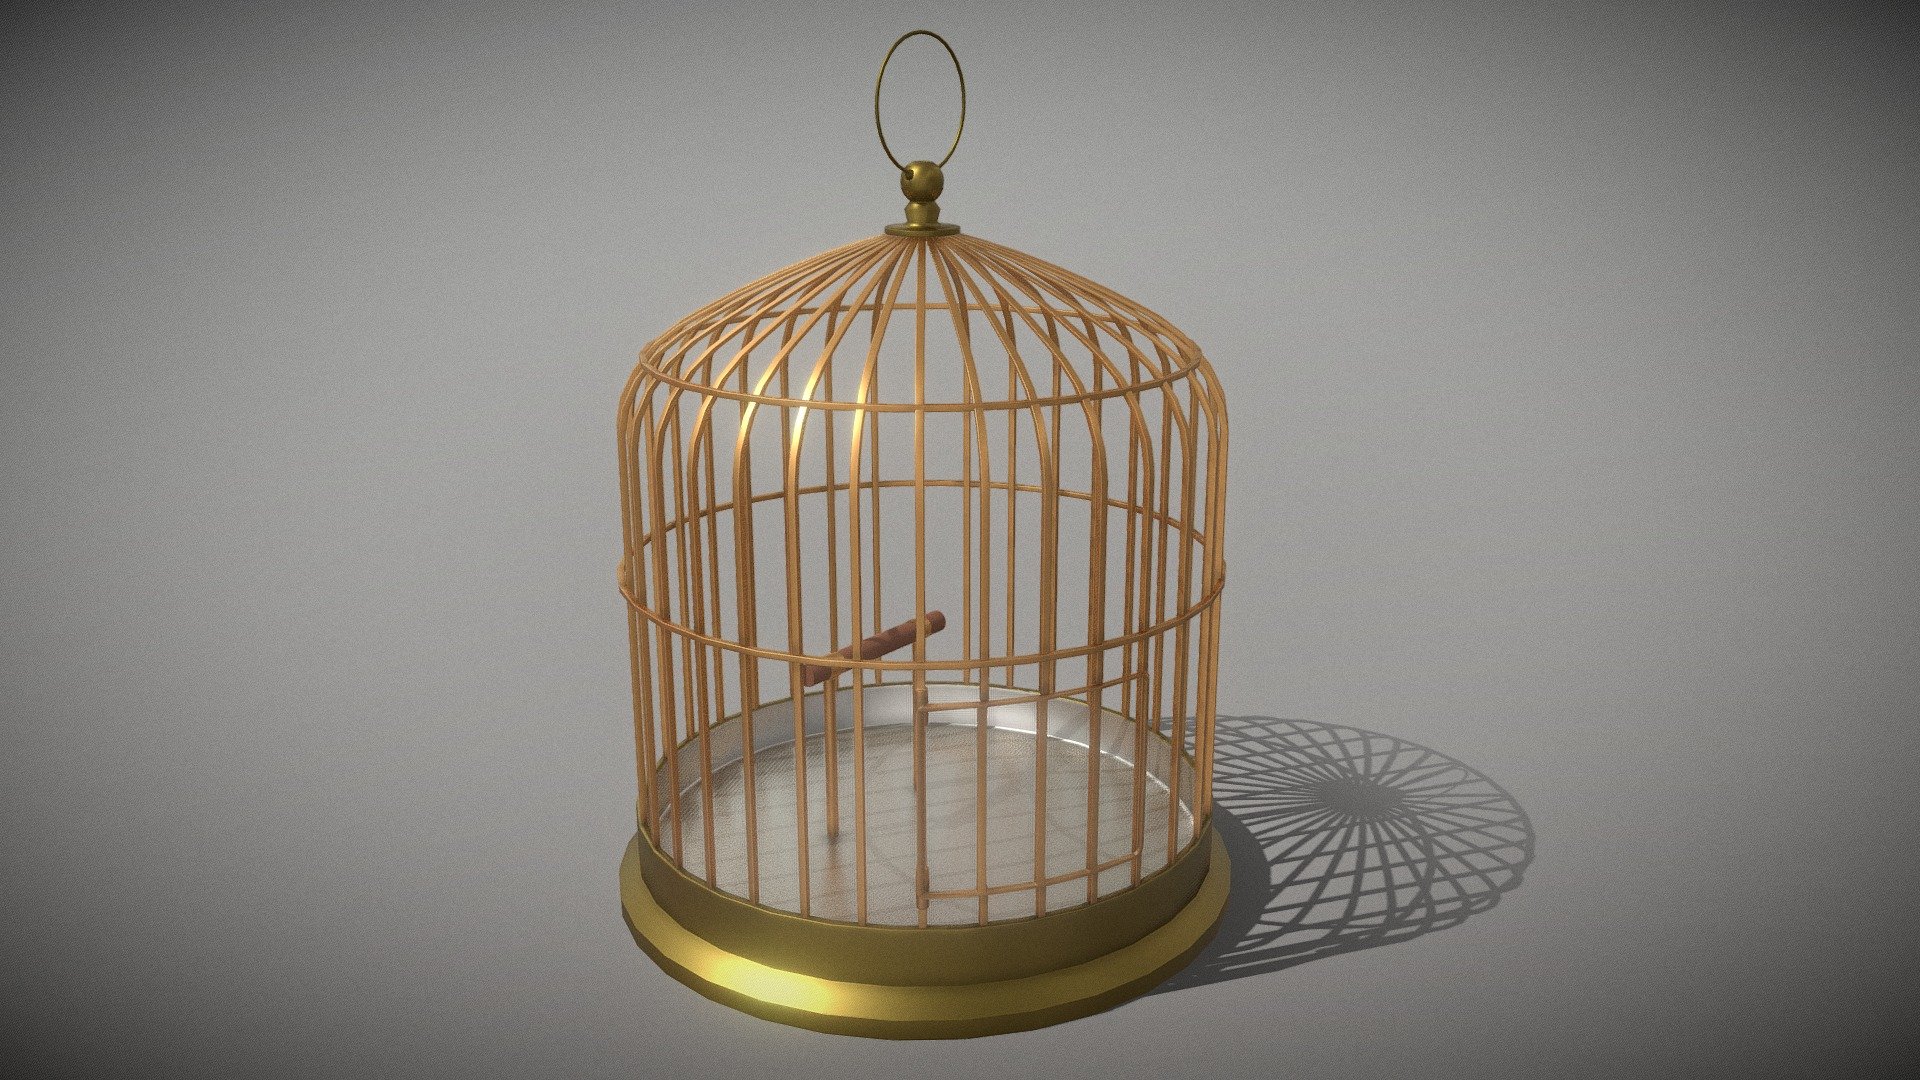 3D low-poly model of Brass Bird Cage

Invite a touch of elegance and nostalgia into your virtual spaces with this exquisite Brass Bird Cage model. 

Whether used as a decorative accent in a Victorian garden, a prop in a whimsical fairy tale scene, or a focal point in a vintage interior, this bird cage adds a touch of sophistication and allure to any environment. Set your imagination free and let this timeless piece become a cherished part of your virtual world! - Brass Bird Cage - Download Free 3D model by 3000volt 3d model